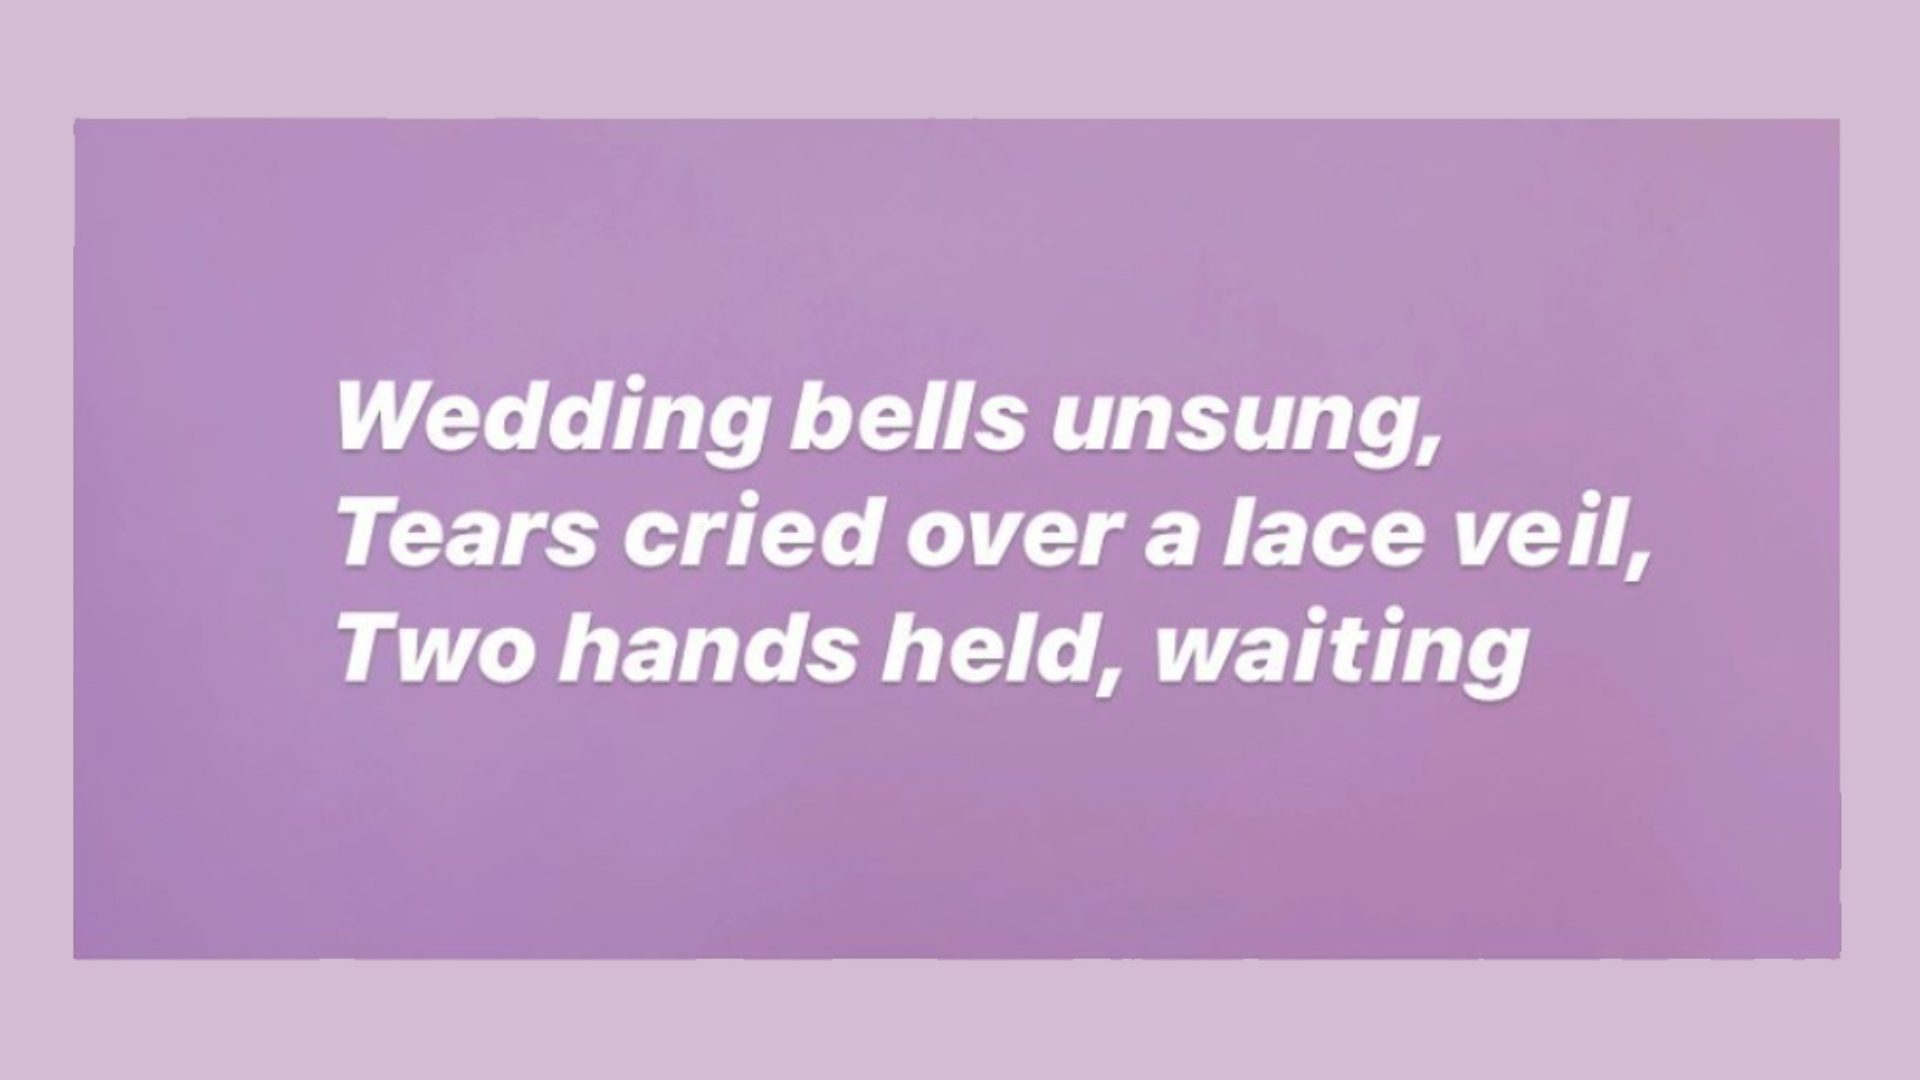 Text on purple background: Wedding bells unsung, tears cried over a lace veil, two hands held, waiting